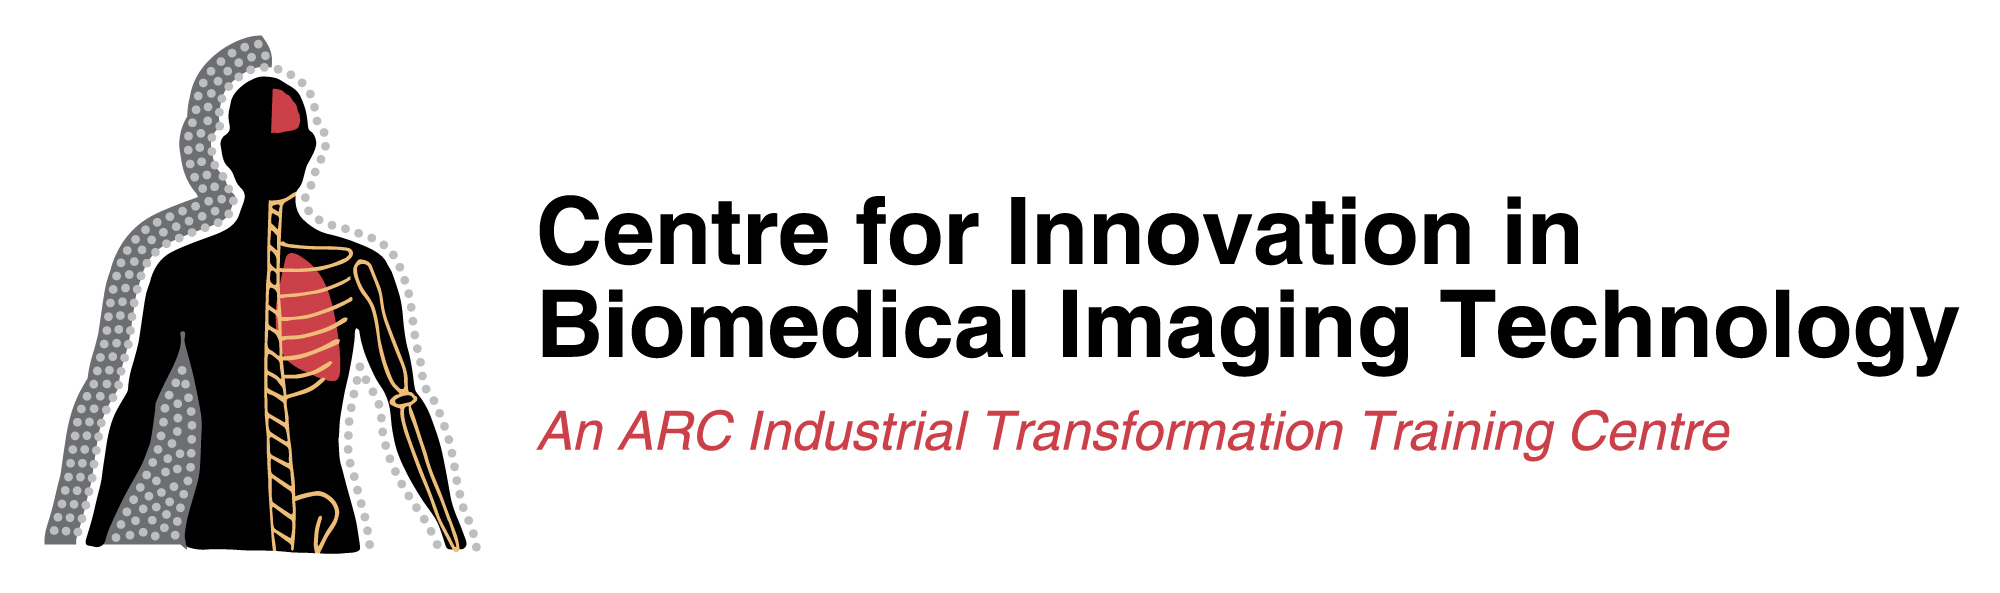 Centre for Innovation in Biomedical Imaging Technology 